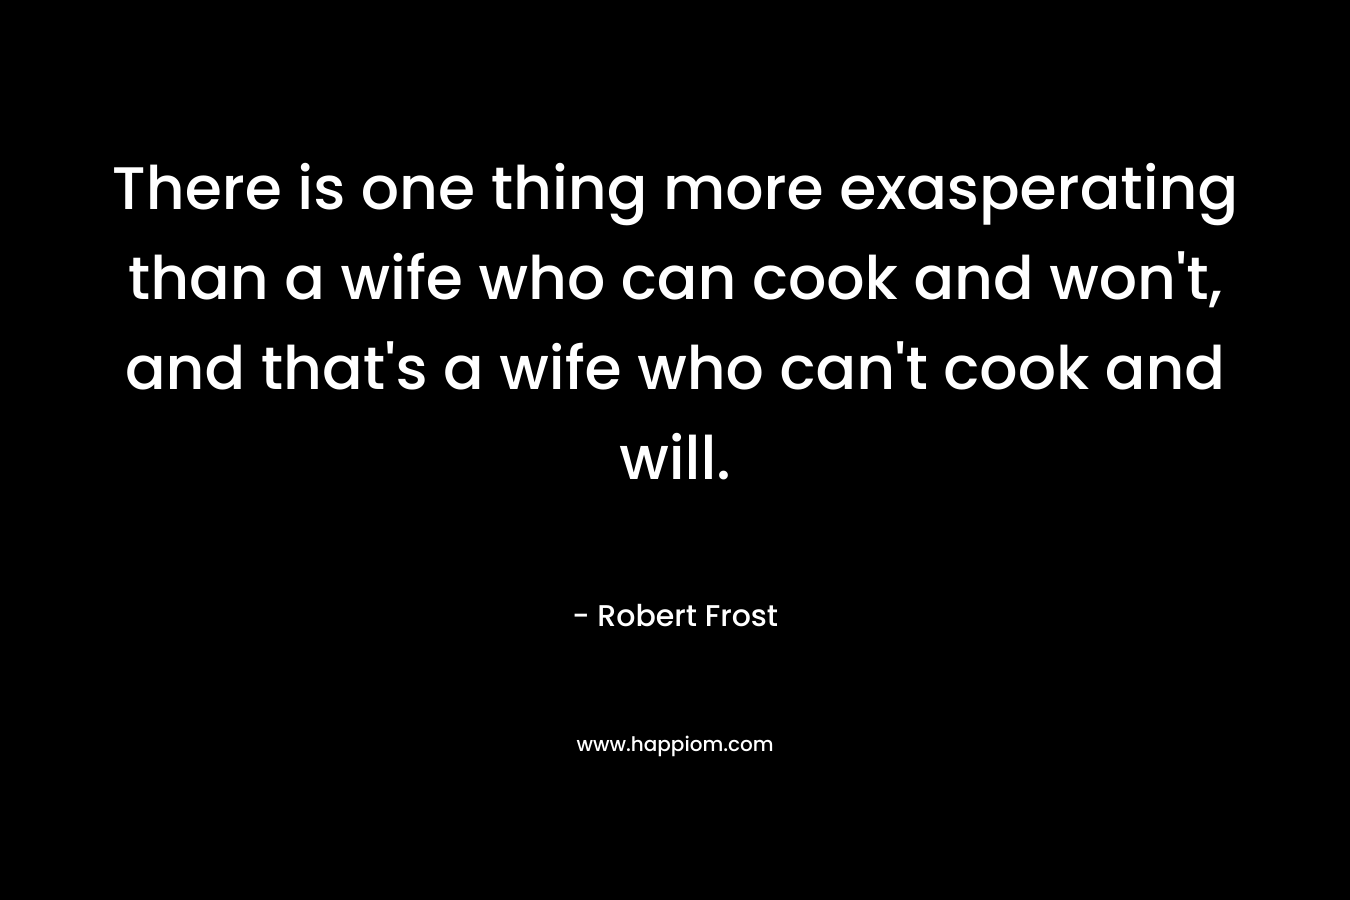 There is one thing more exasperating than a wife who can cook and won't, and that's a wife who can't cook and will.